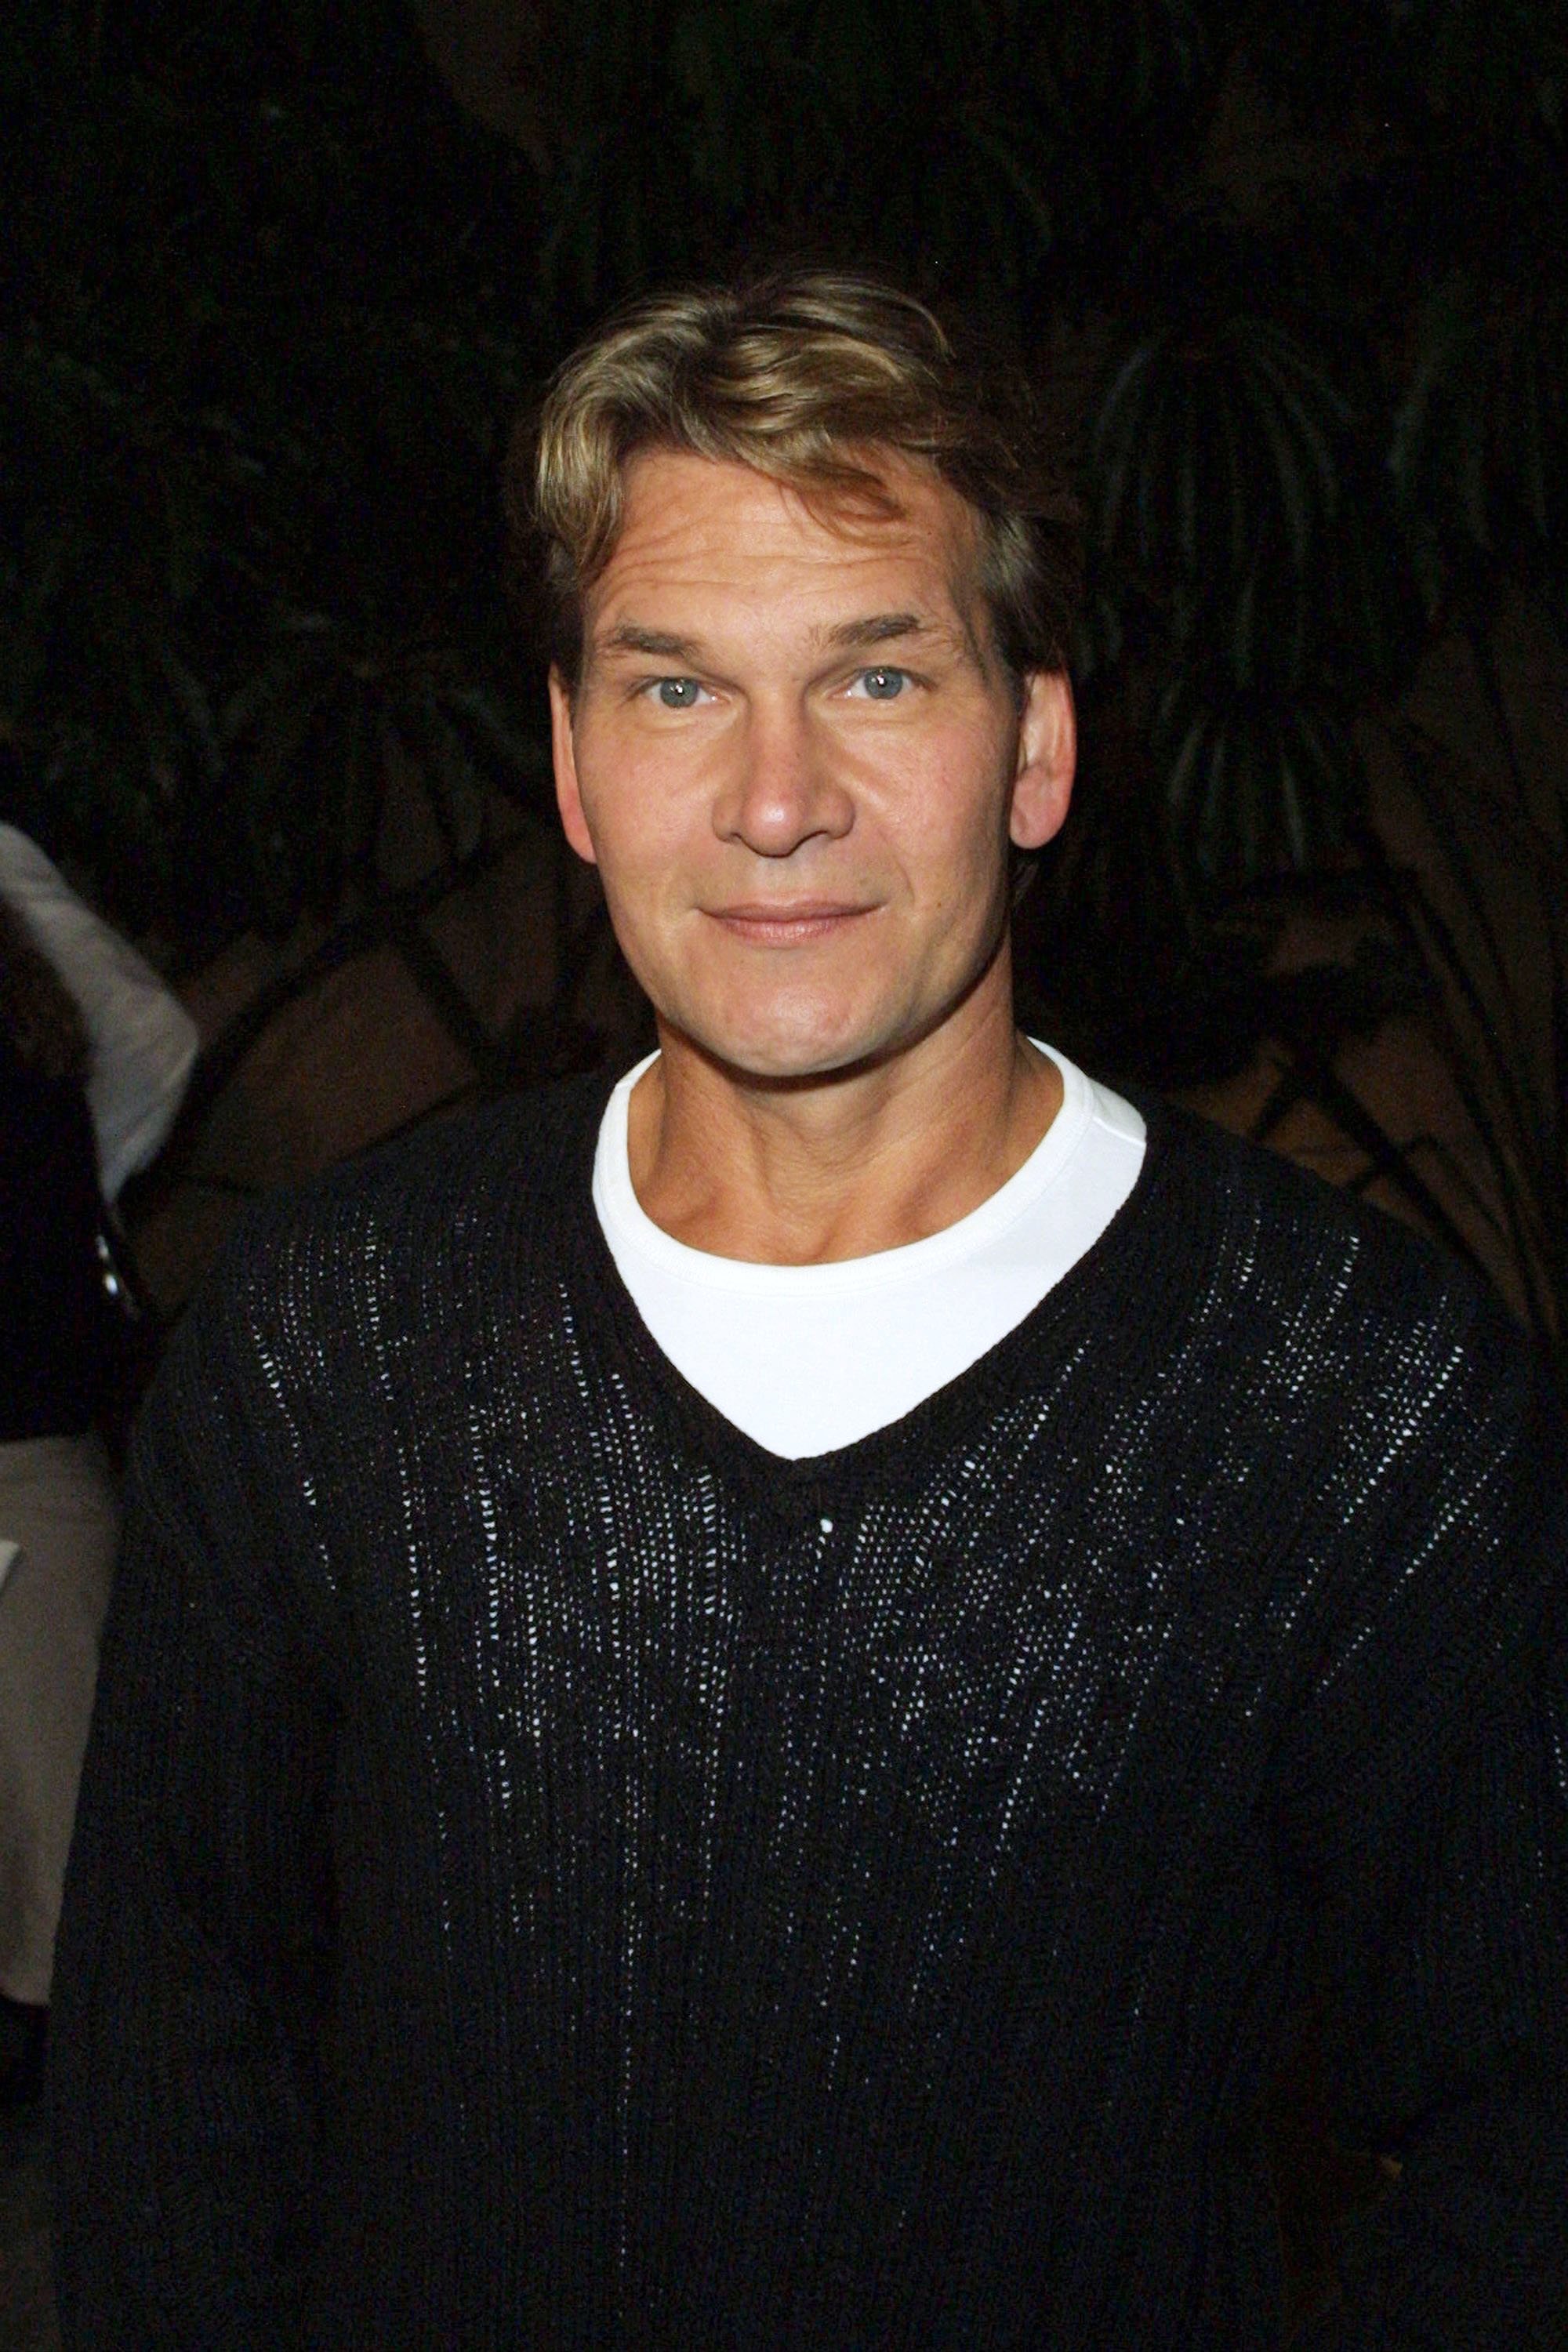 Patrick Swayze in Hollywood 2001. | Source: Getty Images